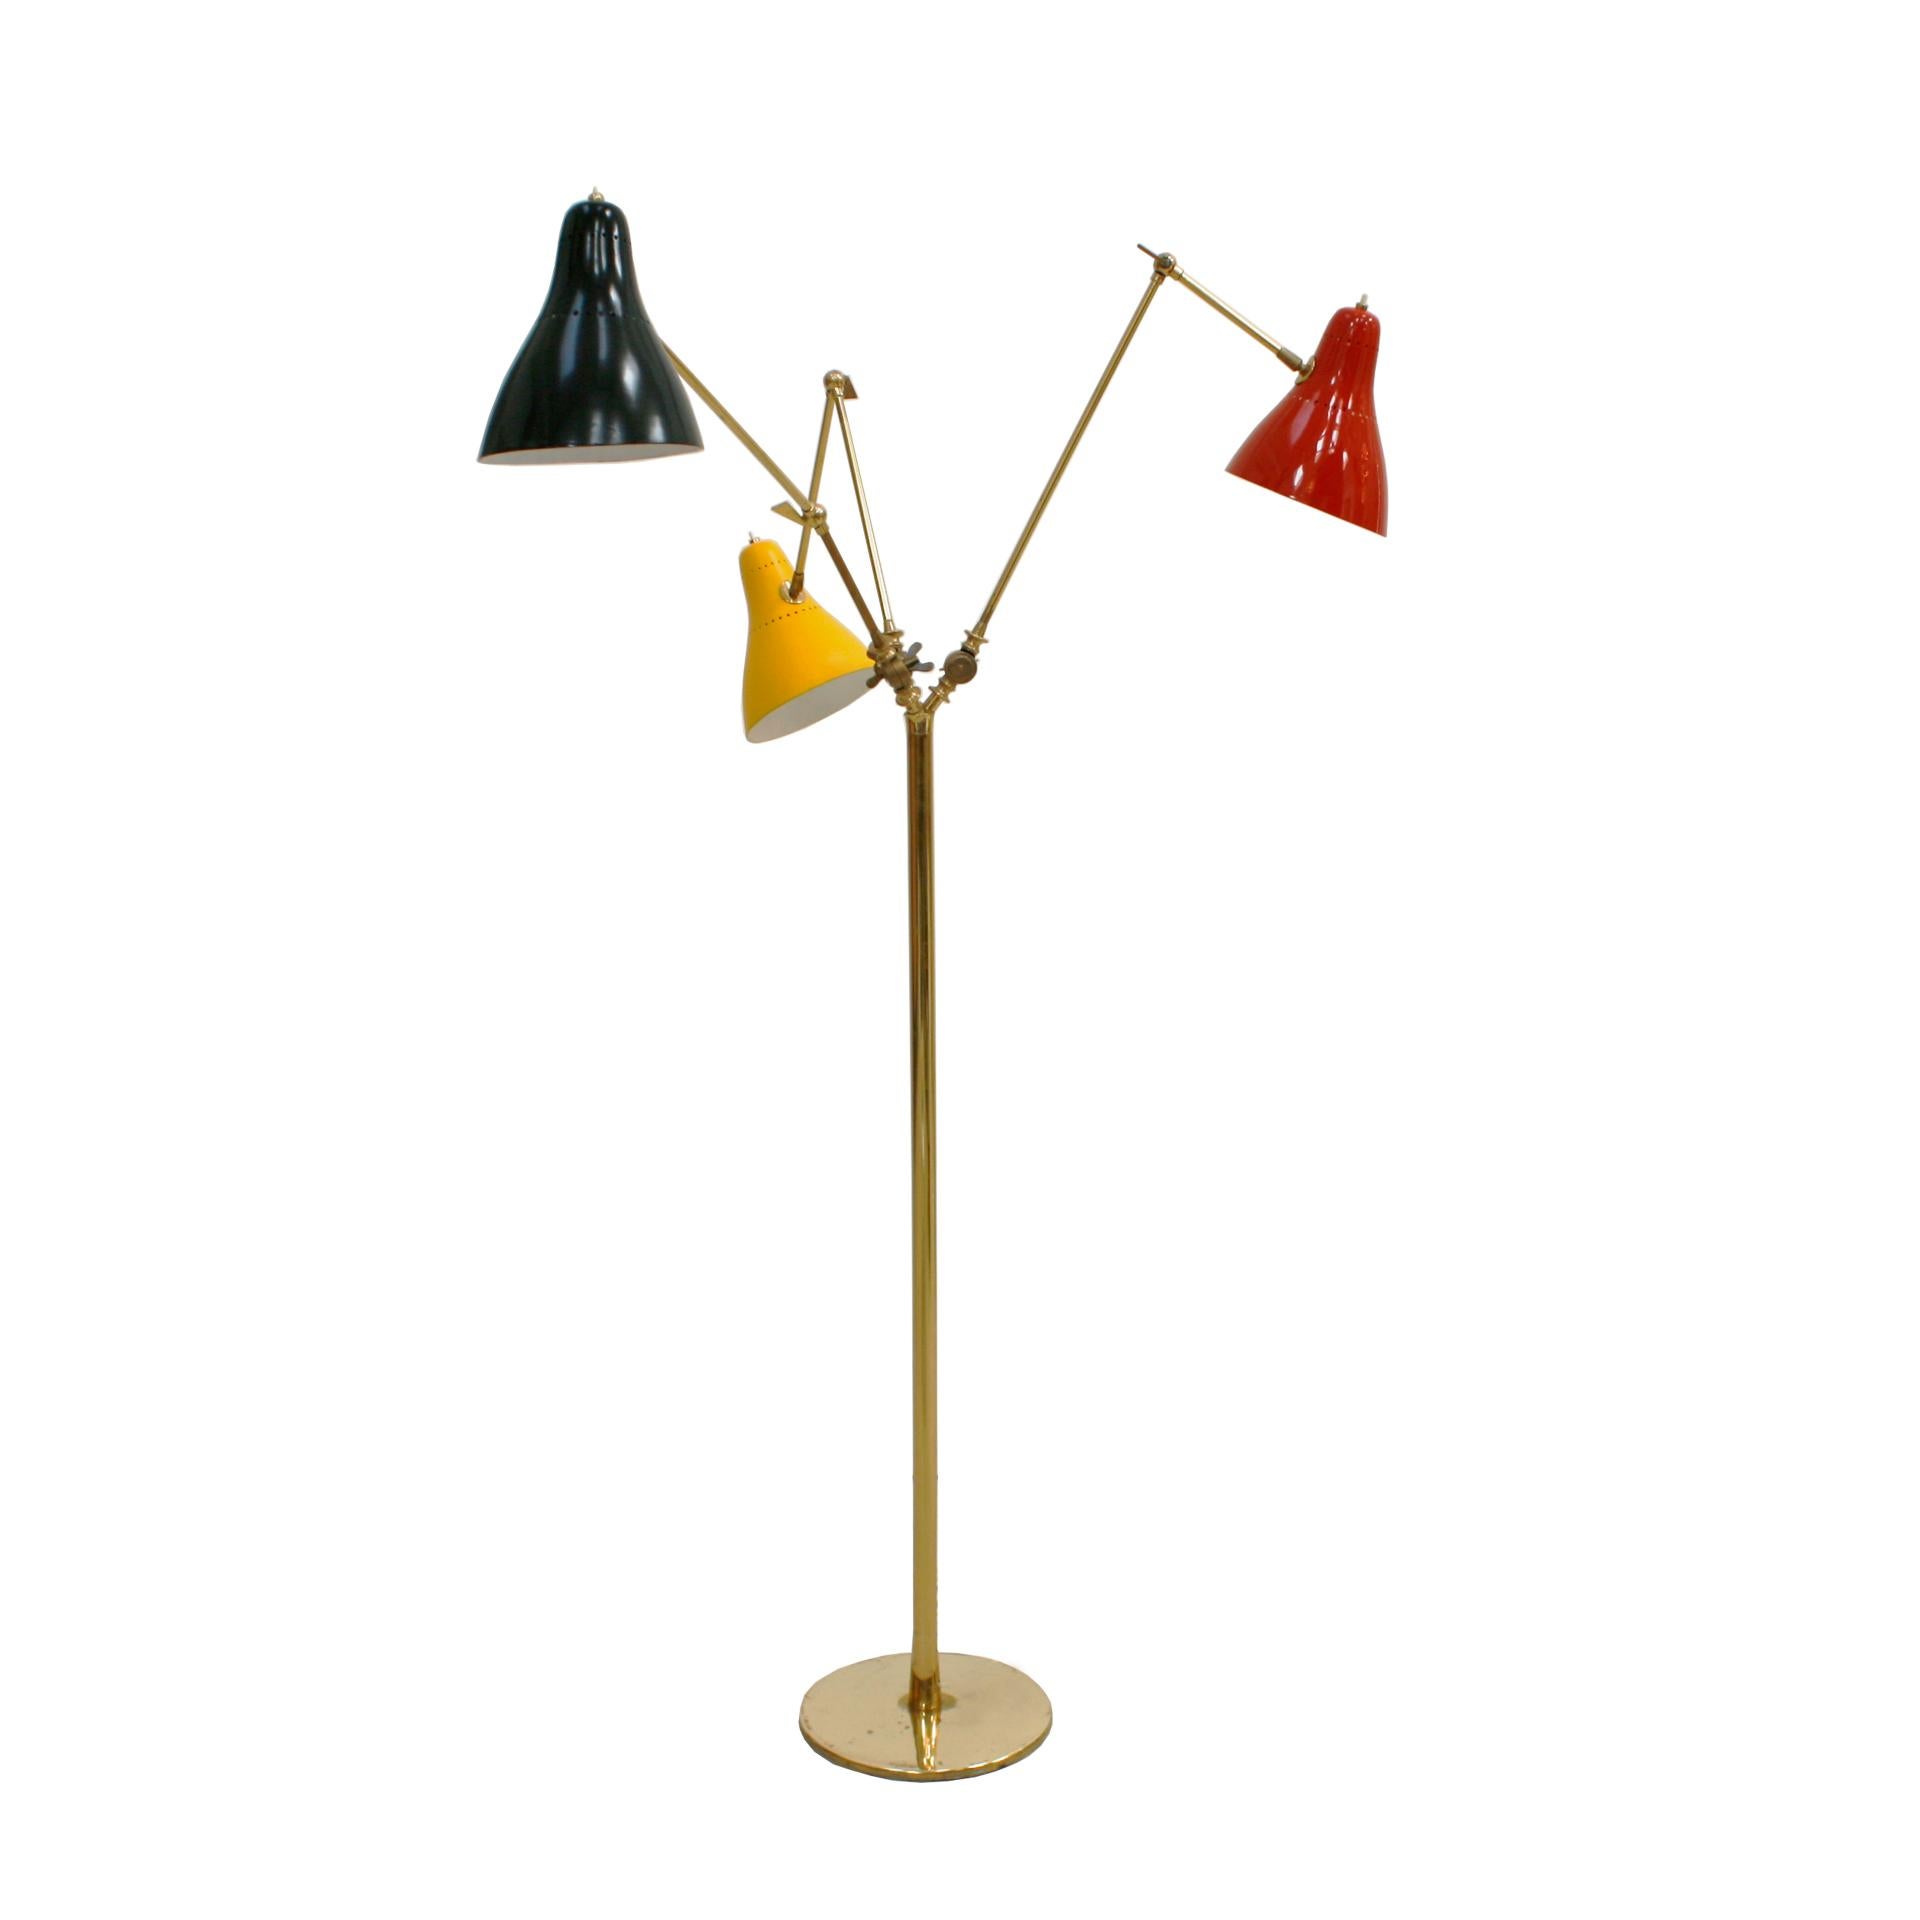 Italian Brass Articulated Floor Lamp from 1950. Crafted with precision and elegance, this Italian floor lamp features adjustable arms reminiscent of the iconic triennale style, allowing you to customize the lighting to suit your needs. Each arm is